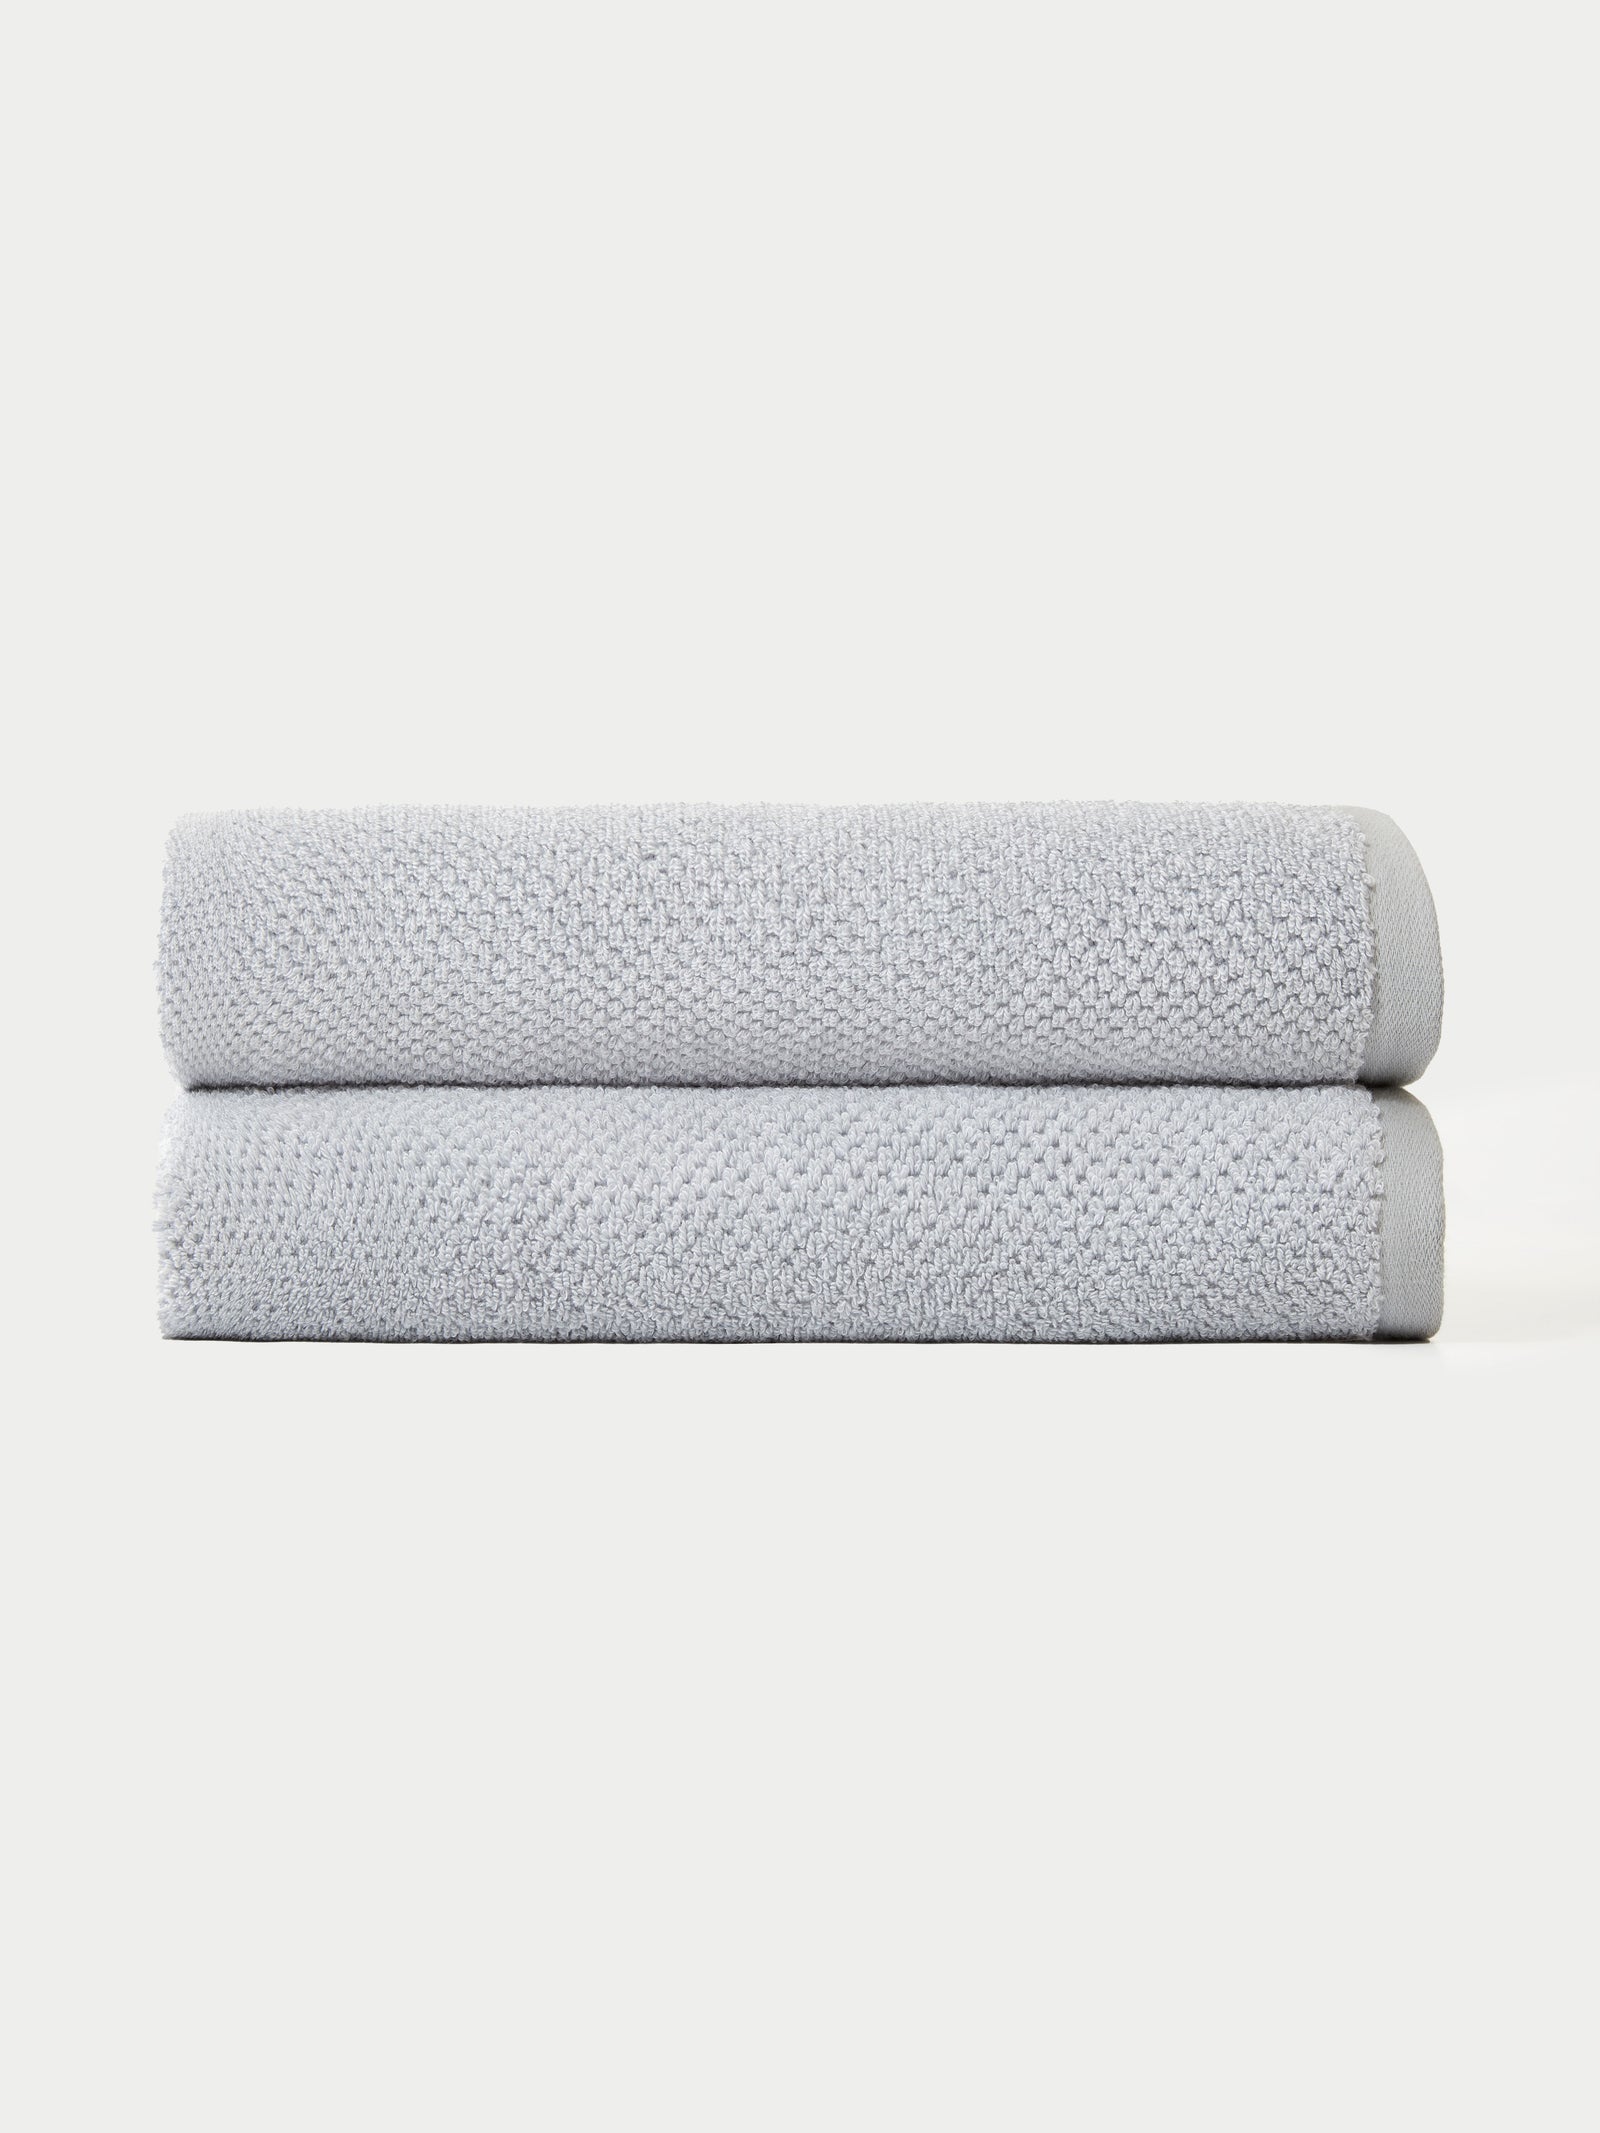 Nantucket Bath Towels in the color Heathered Harbor Mist. Photo of Nantucket Bath Towels taken with the bath towels on a white background. 